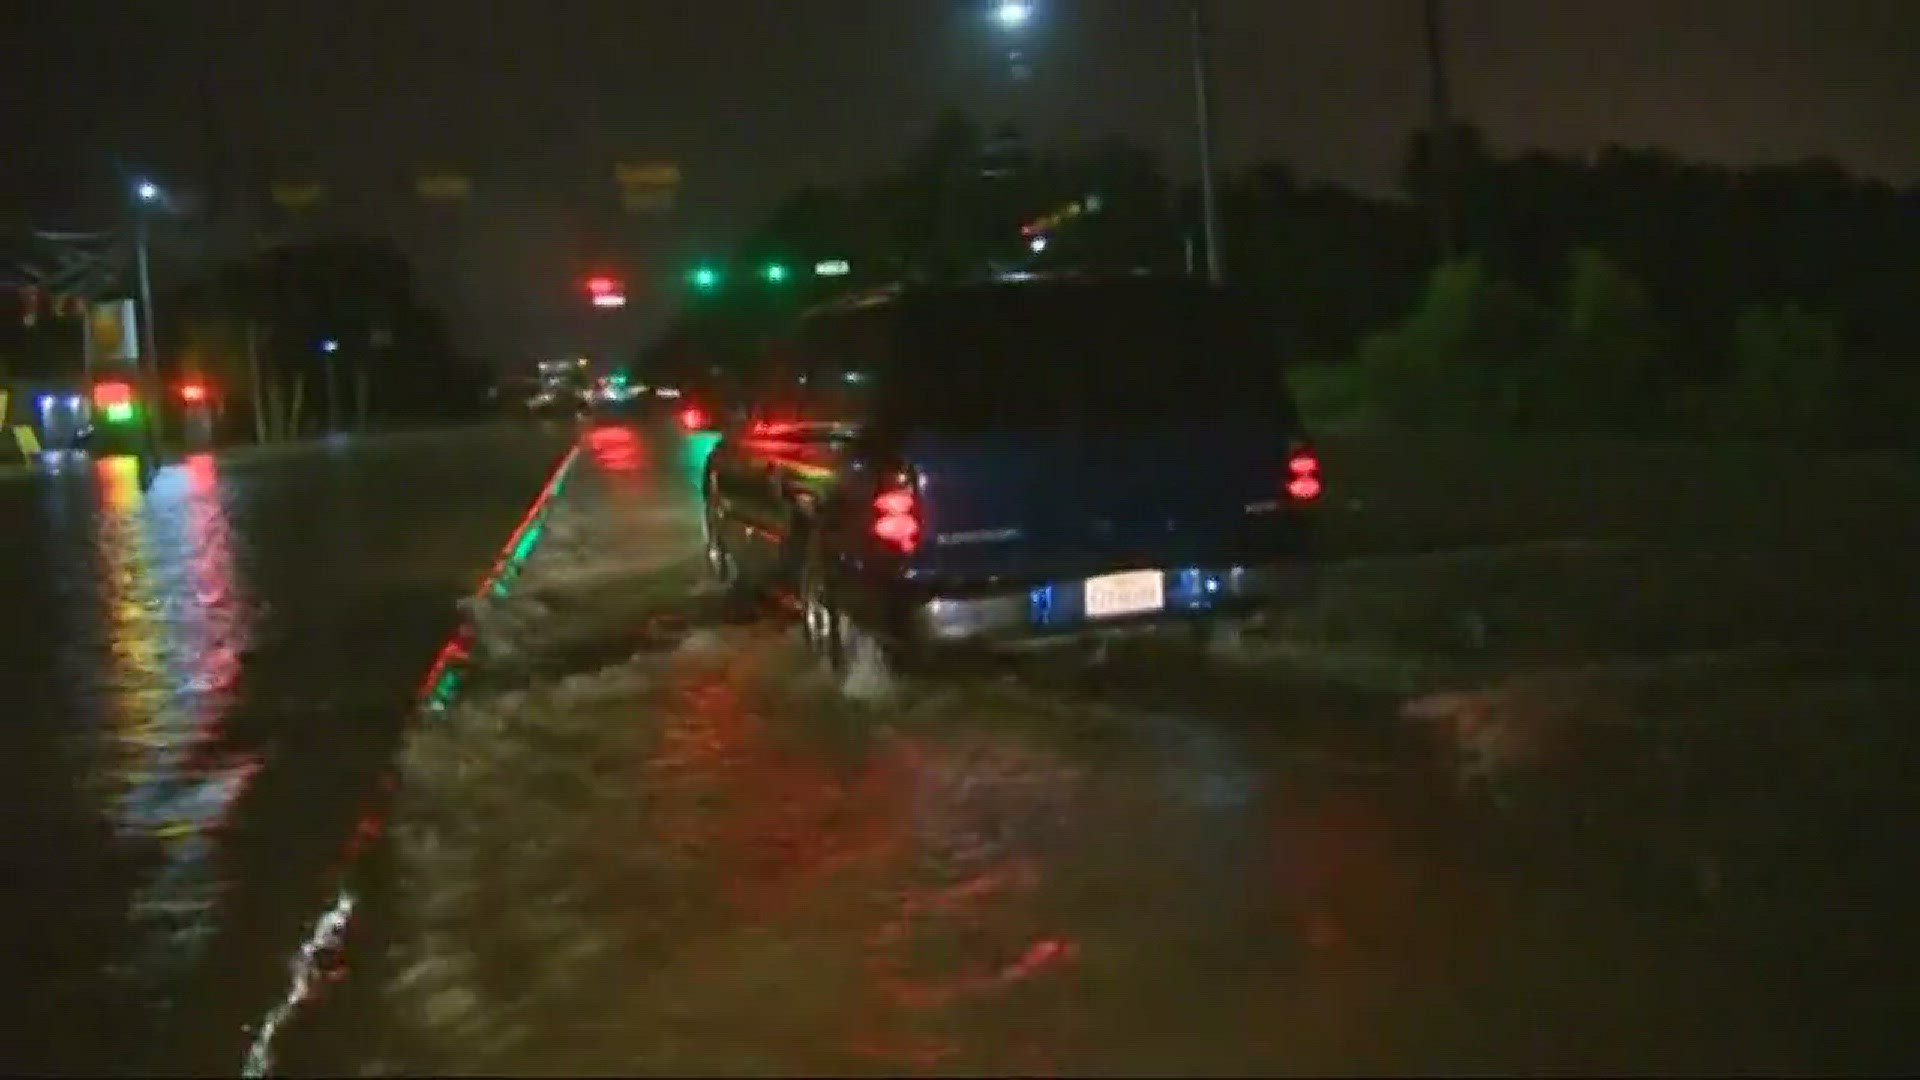 Saums Road at Greenhouse is always a problematic spot when the heavy rain falls. KHOU 11's Sherry Williams reports on drivers trying to navigate the flooded streets.